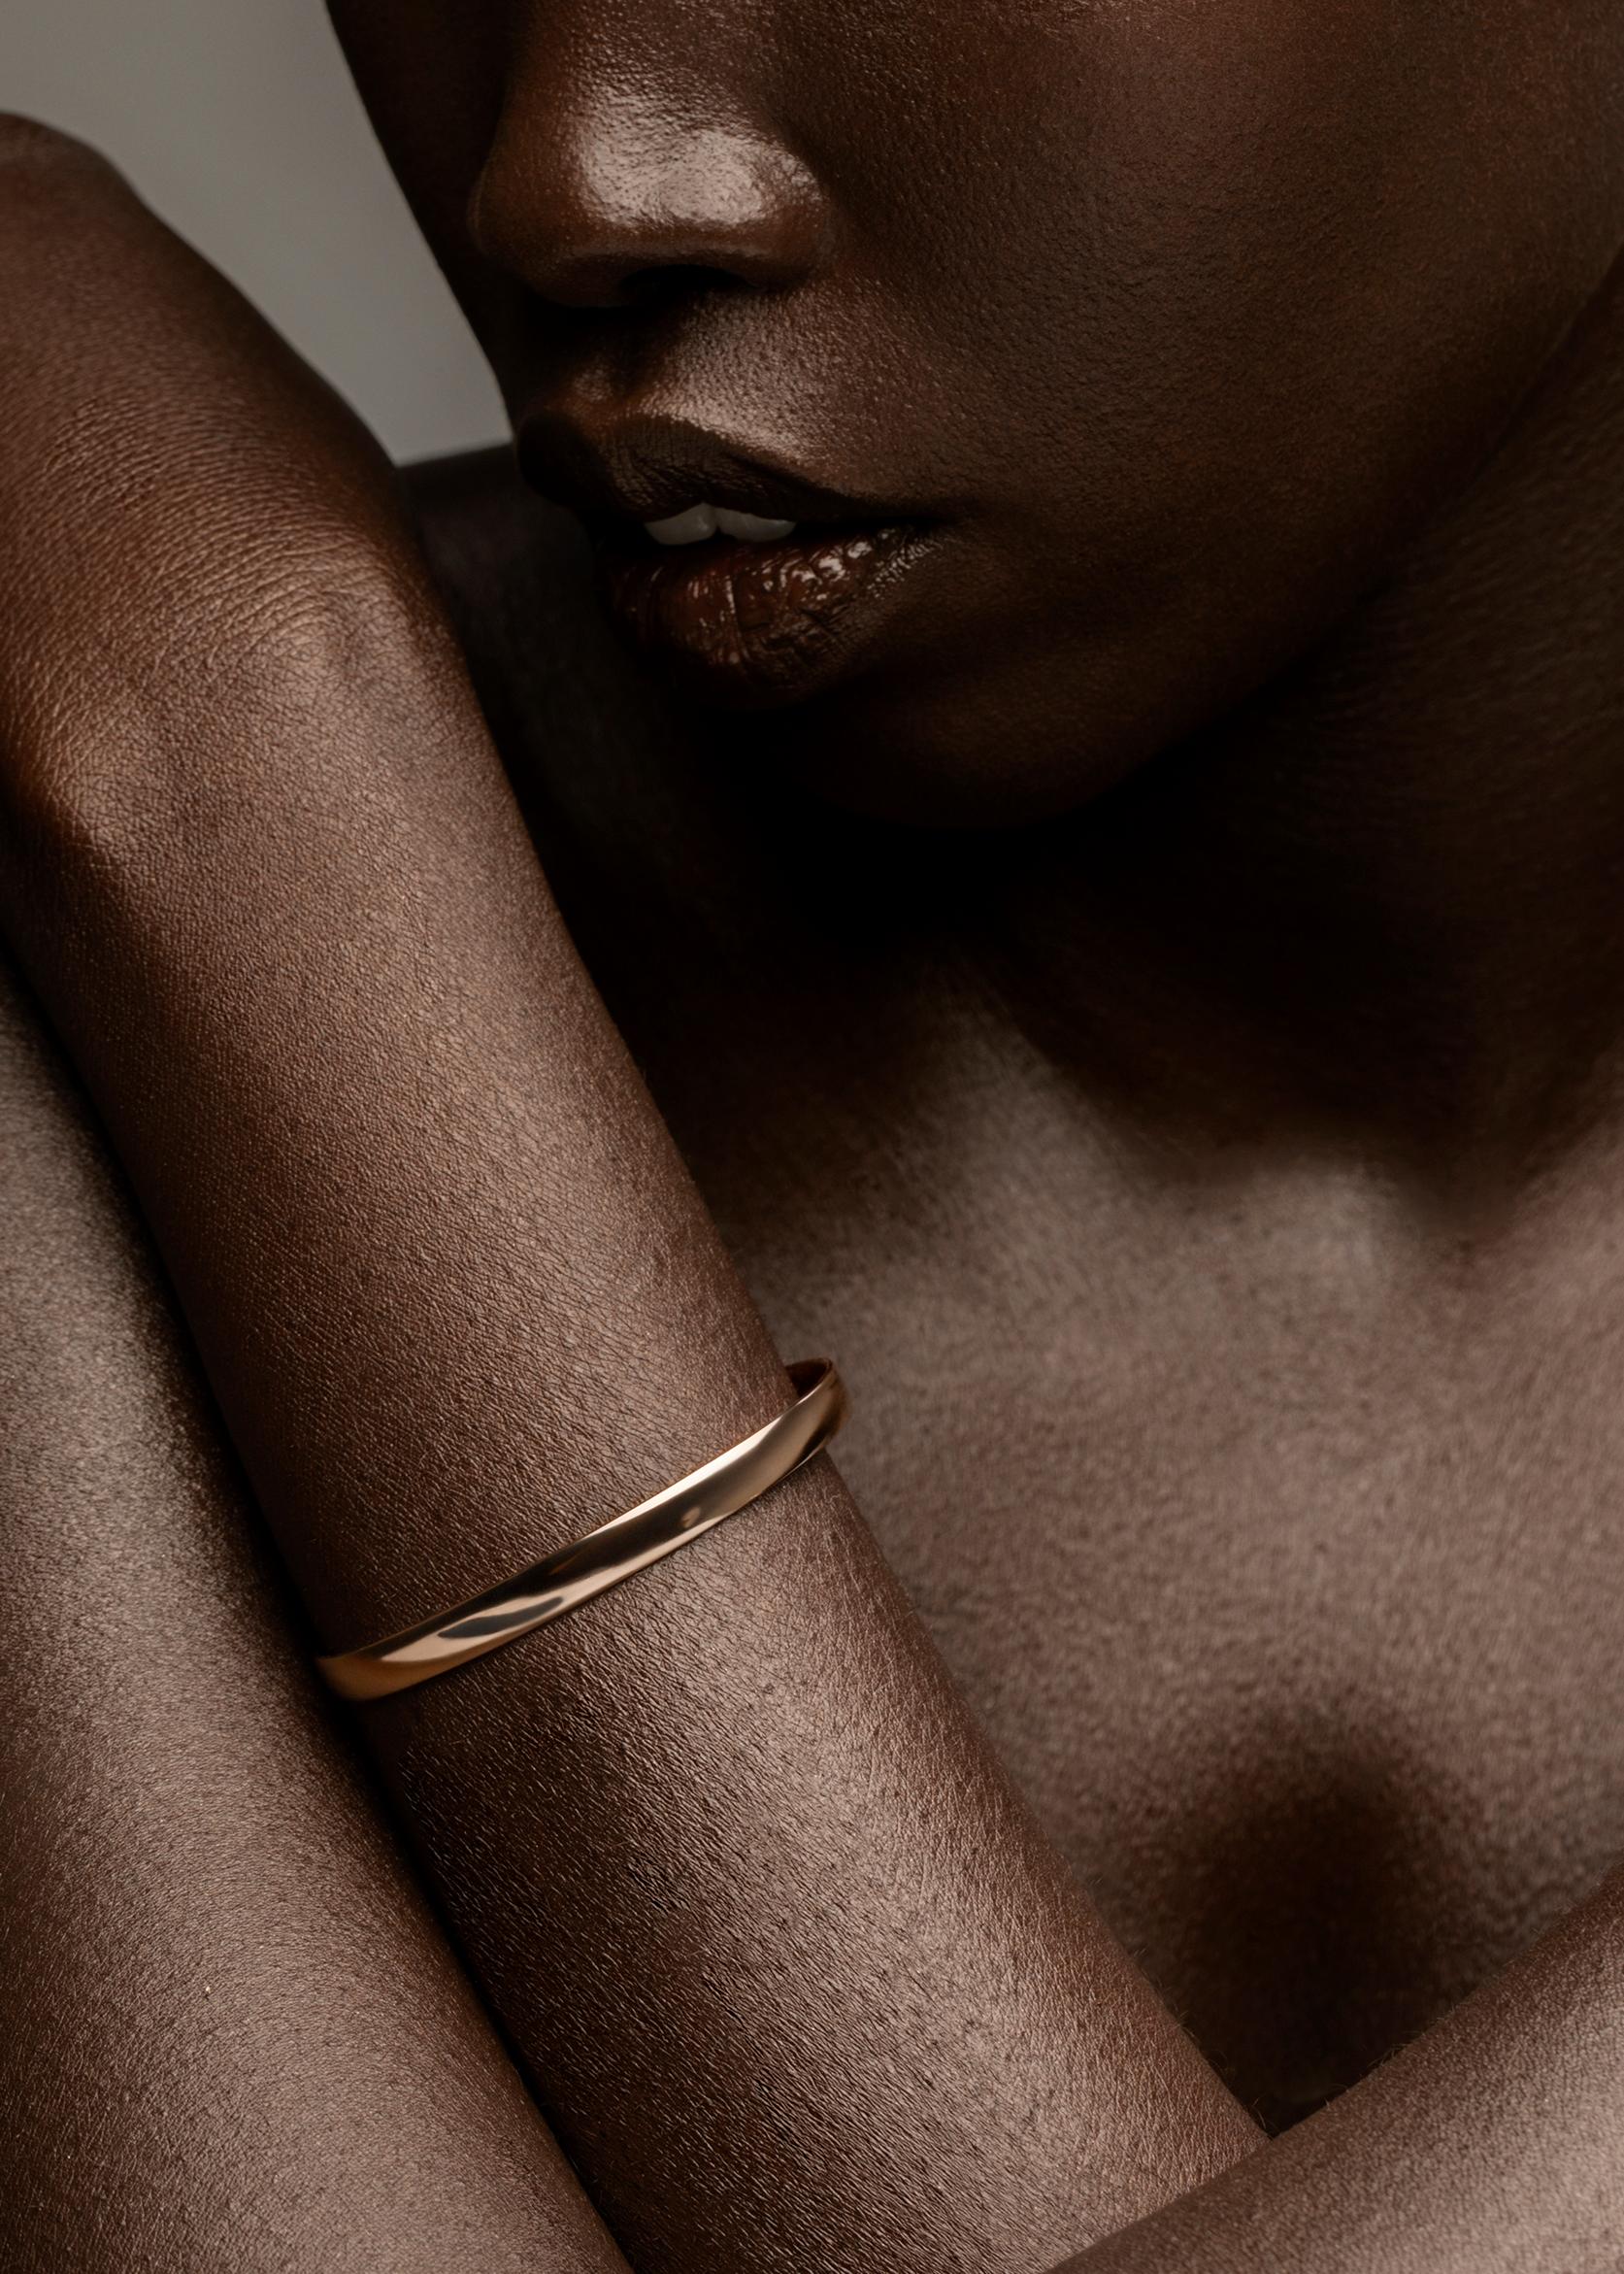 The Sincerity cuff is the perfect bracelet with streamlined design for all occasions.

Handcrafted in NYC with 18kt certified Fairmined Ecological gold that is toxic chemical free, sustainable, ethical and clean.

Please allow 3-4 weeks from your